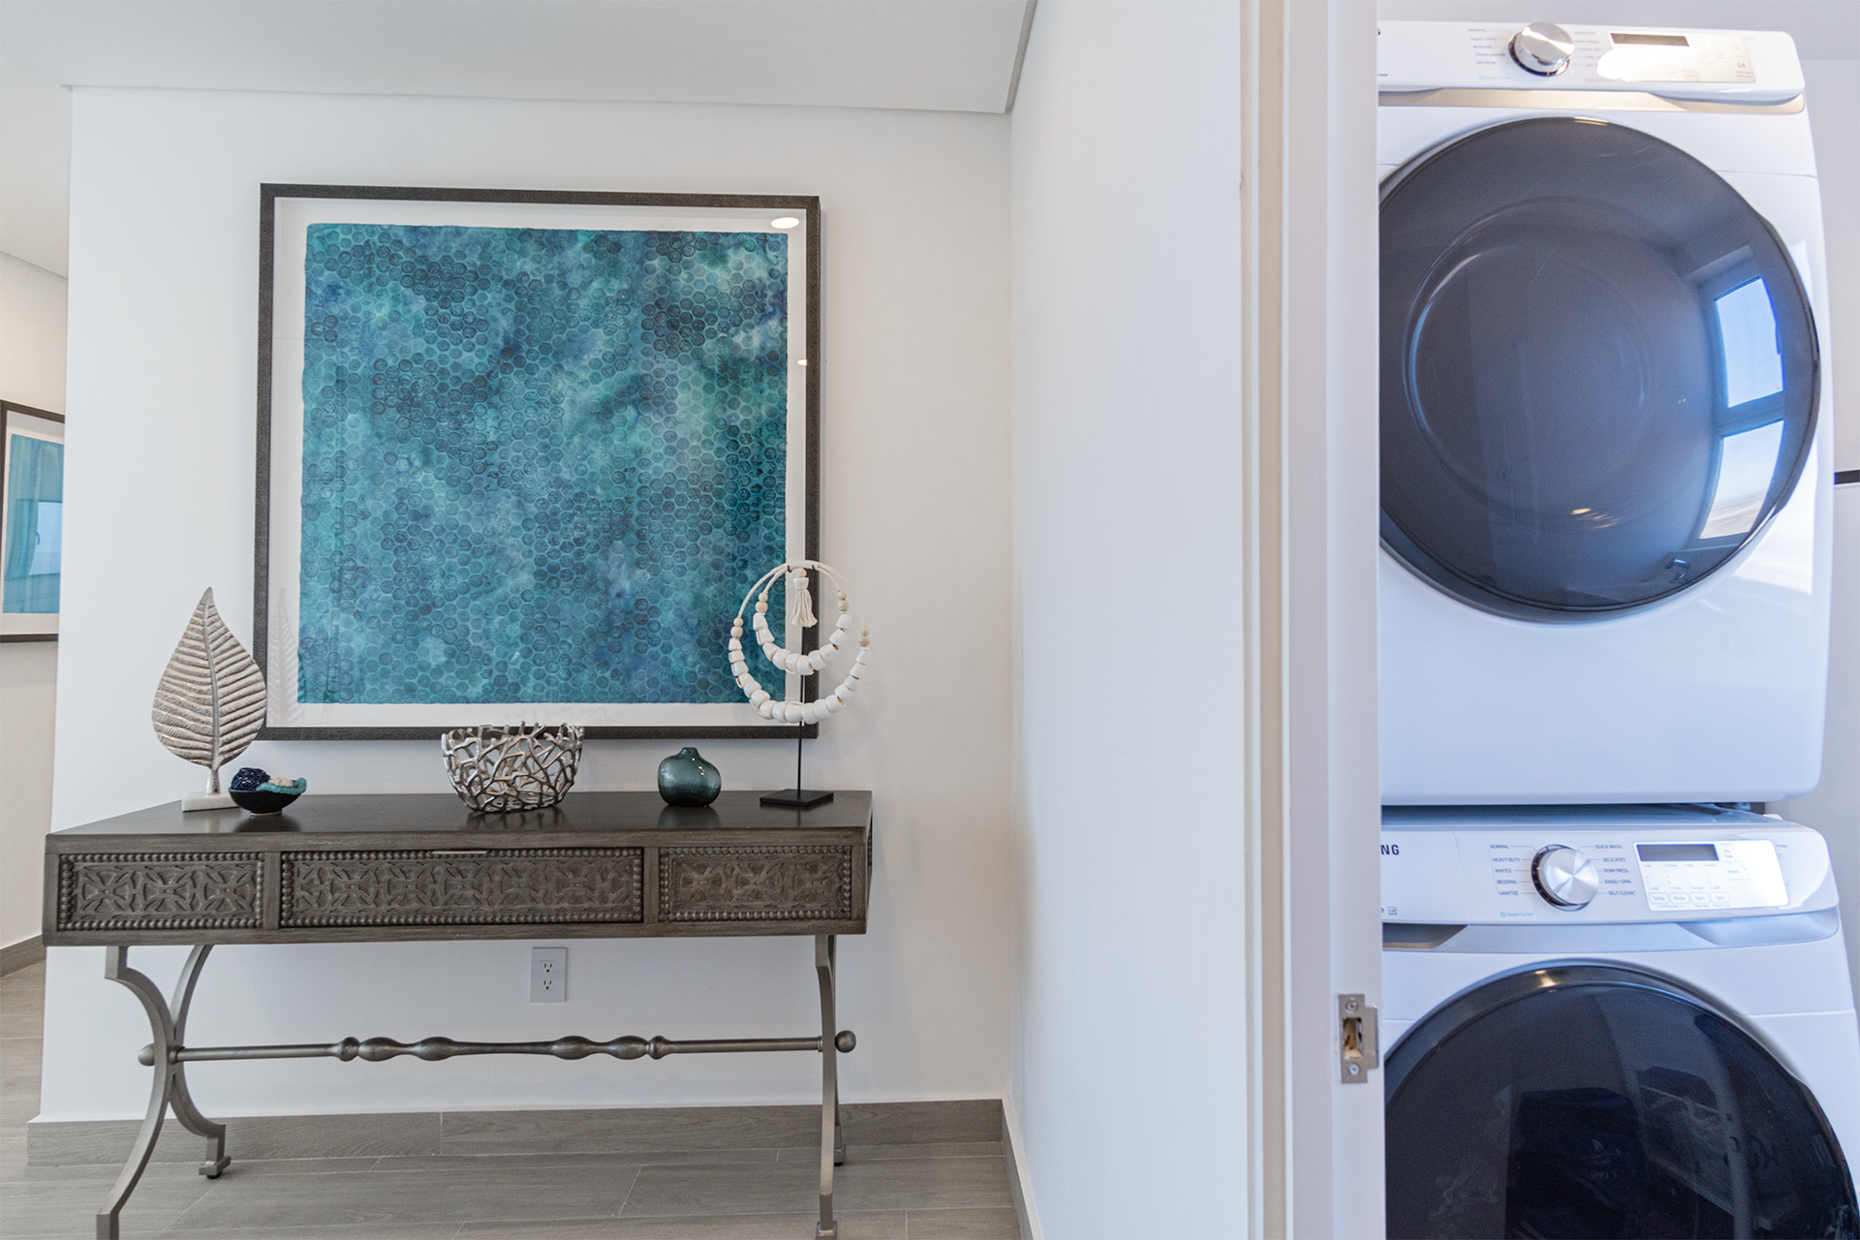 From the hall you access the utility room, offering a washer and dryer.